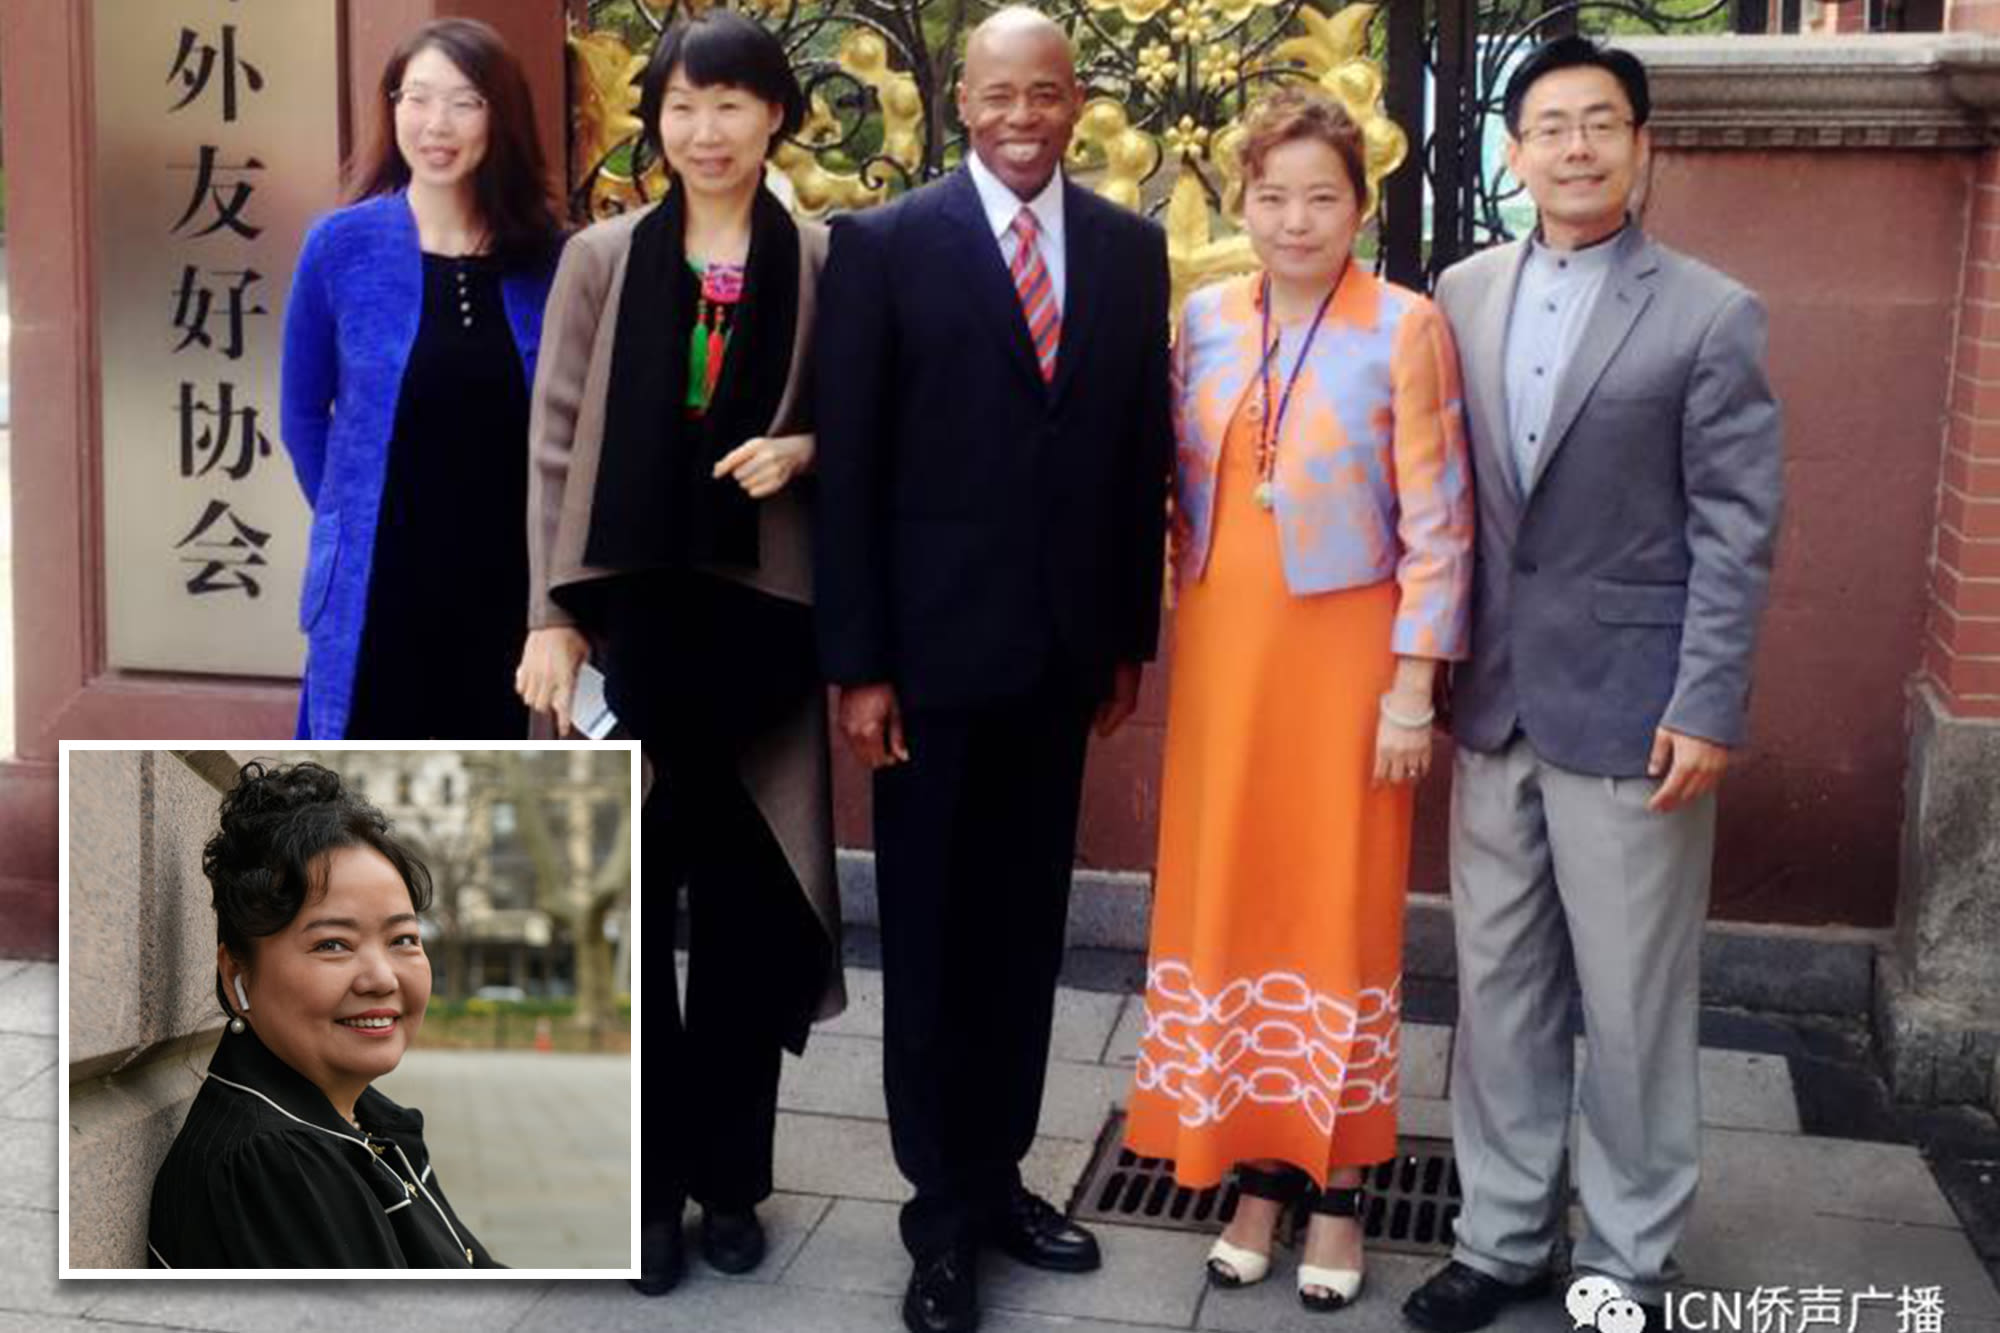 Feds probing Eric Adams and top adviser’s trips to China